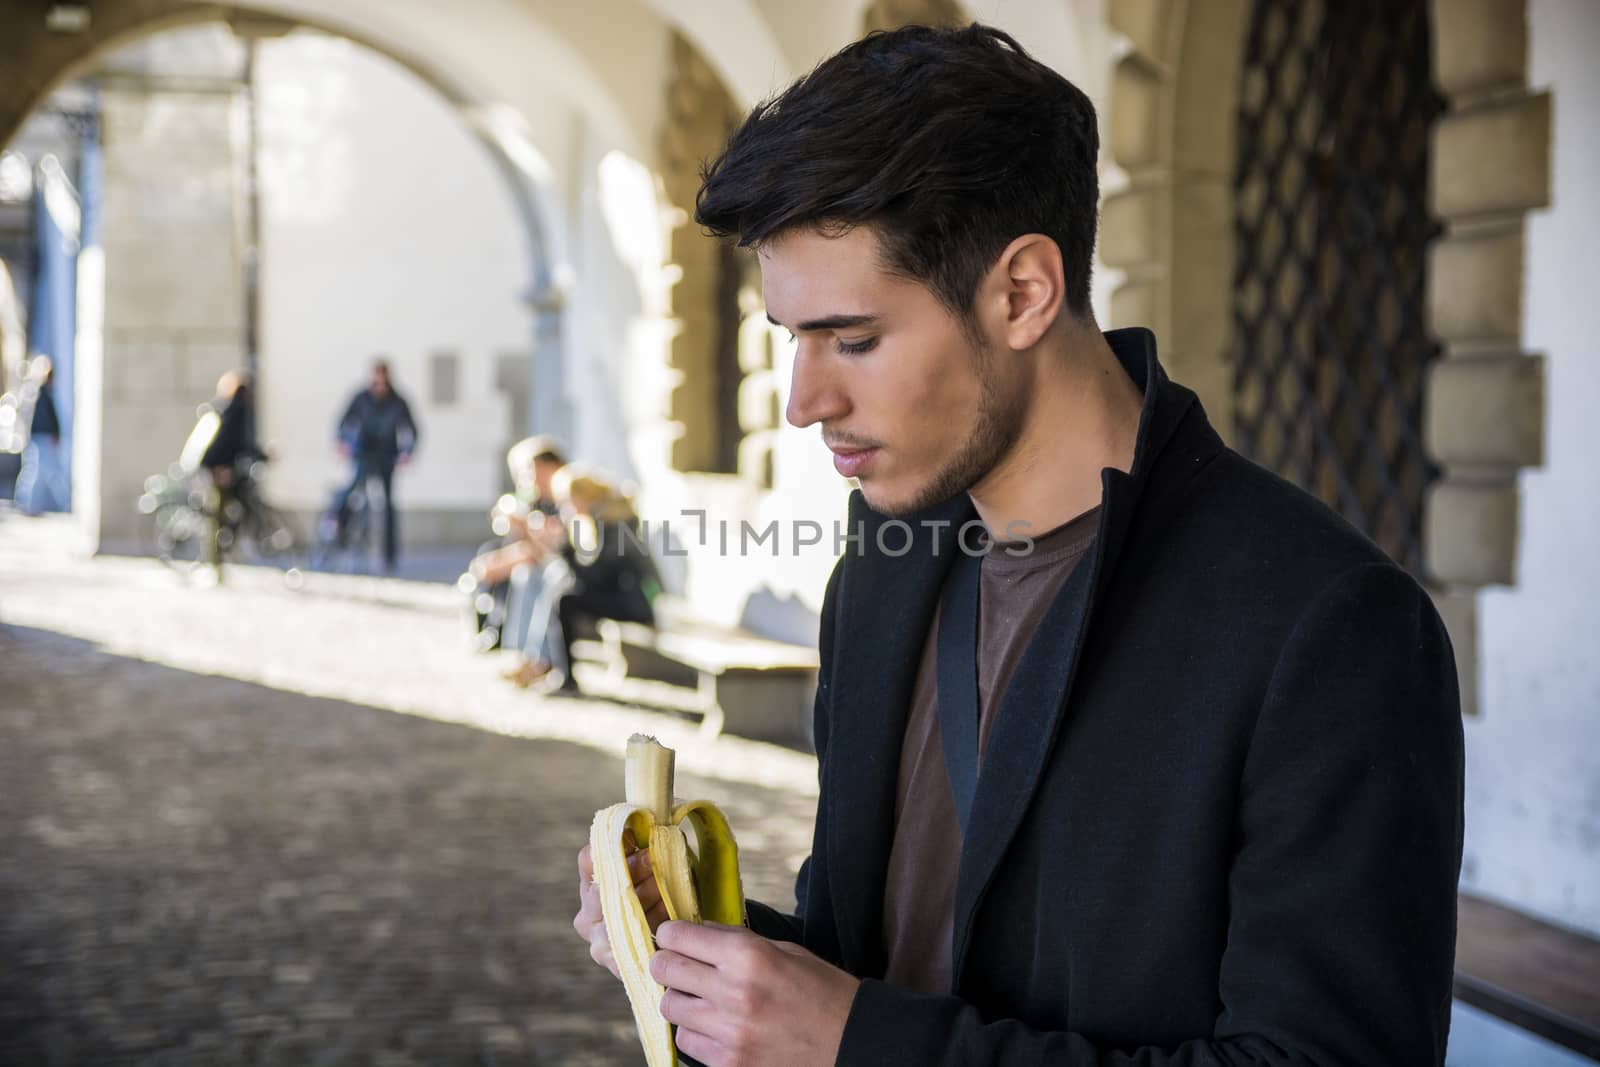 Young man with banana standing on street in Lausanne while looking down. Arch in sunlight on background